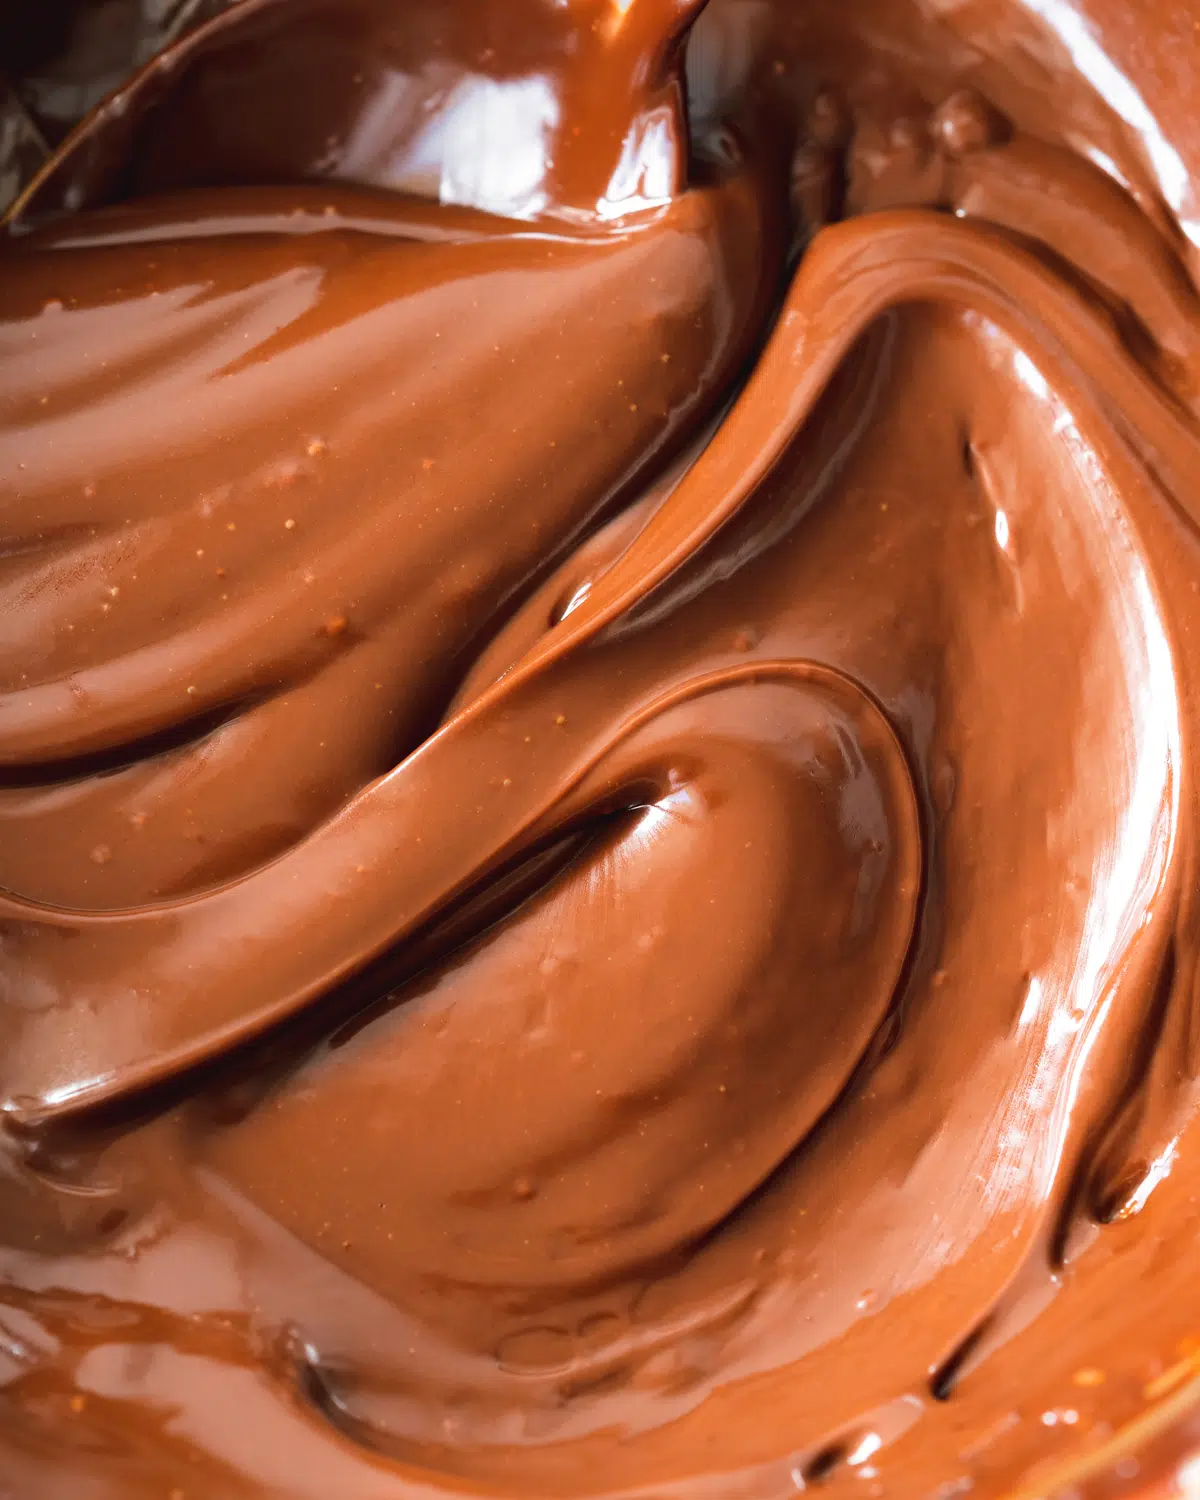 non-dairy chocolate ganache smoothed out with a spoon.